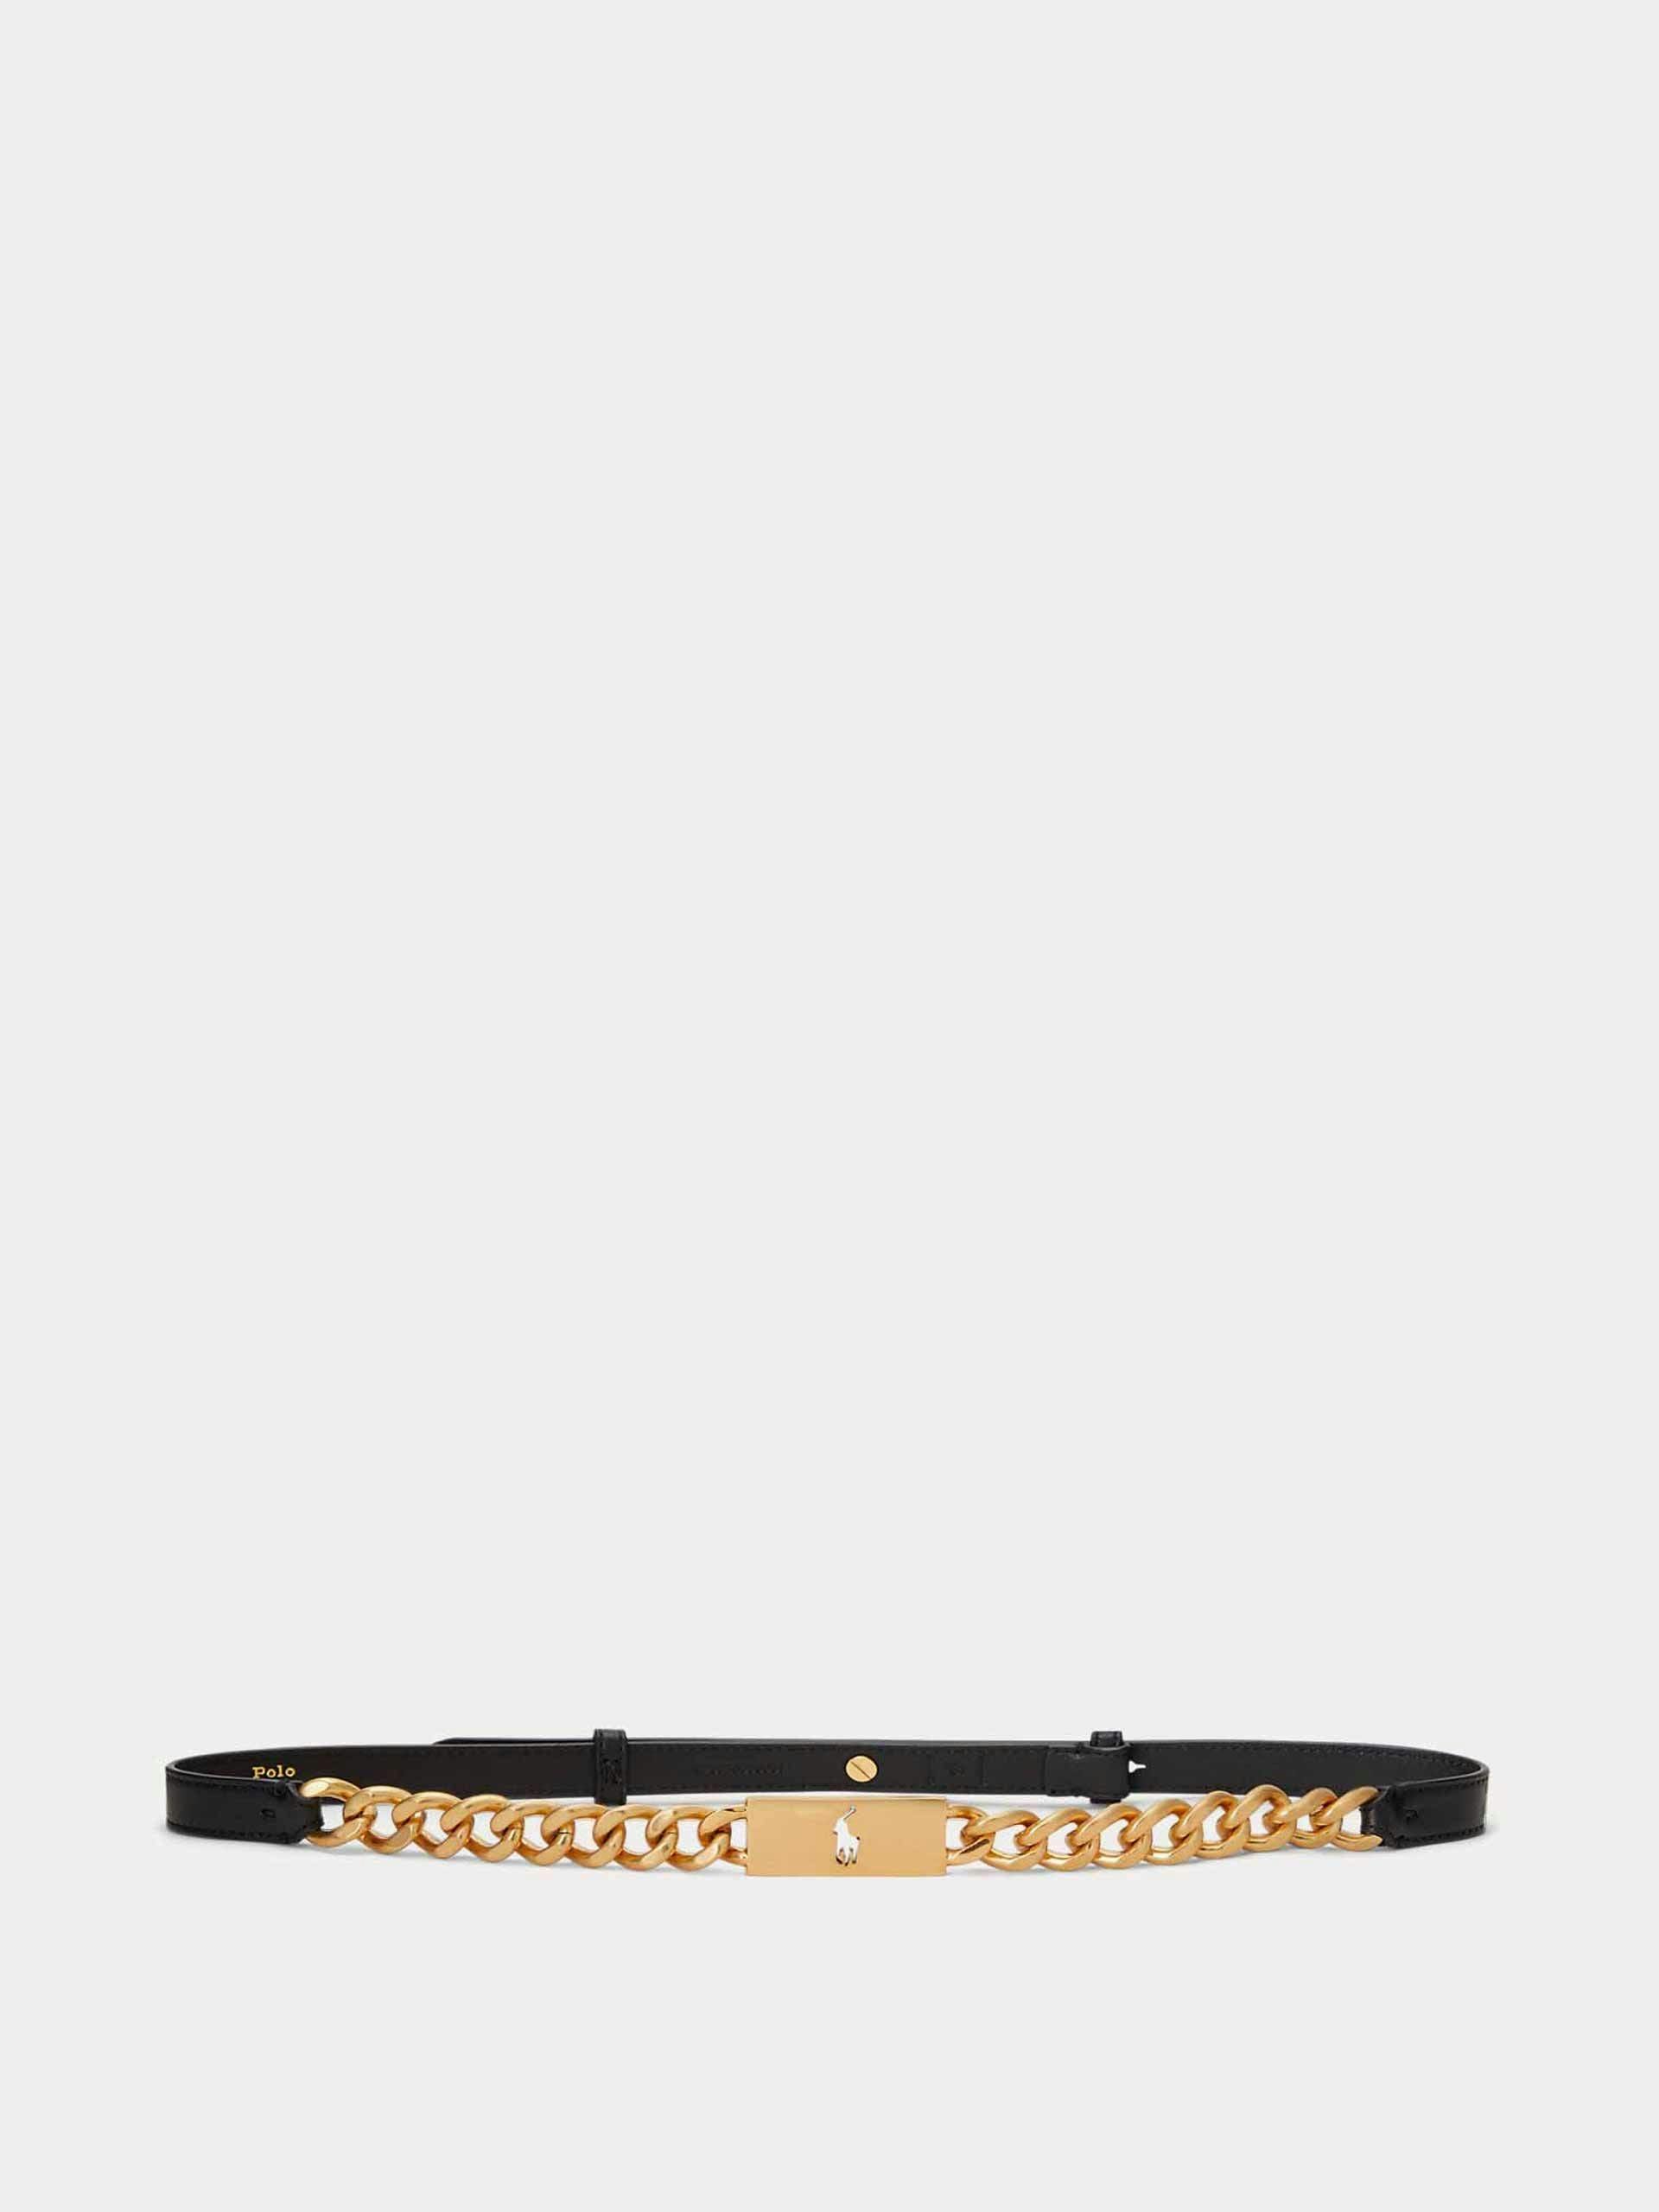 Chain and leather skinny belt